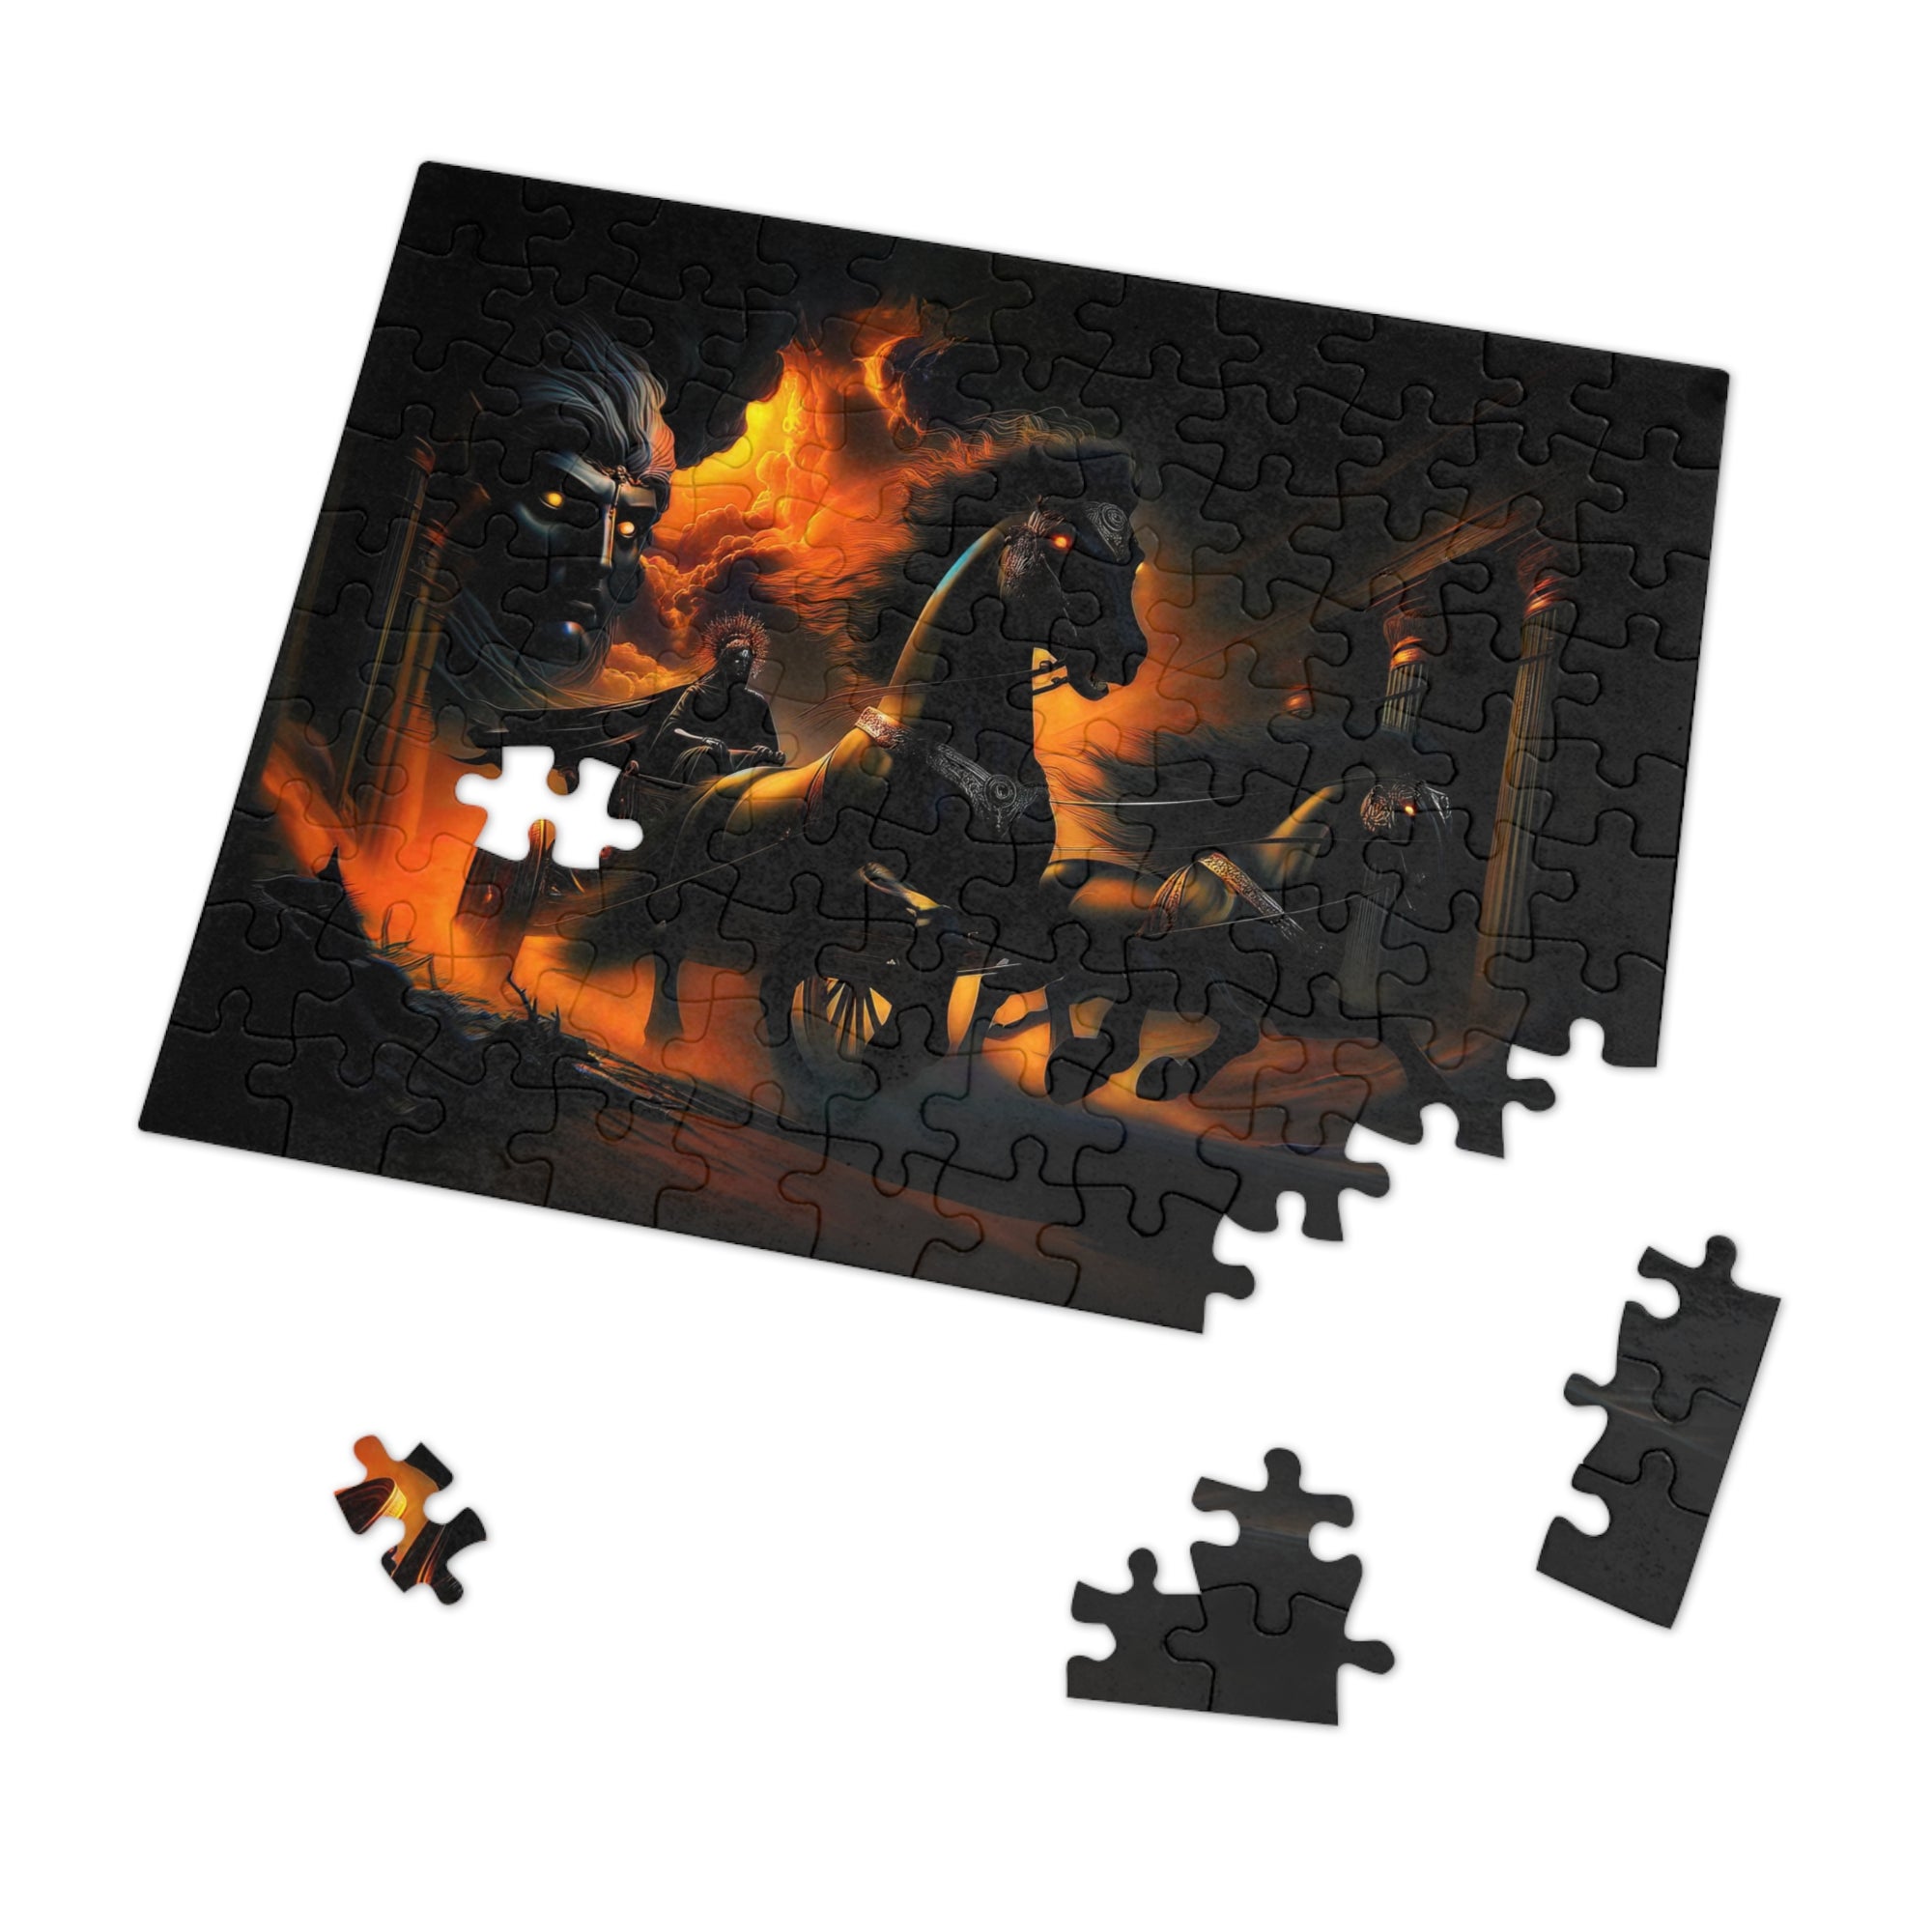 Chariot of the Tempest Jigsaw Puzzle